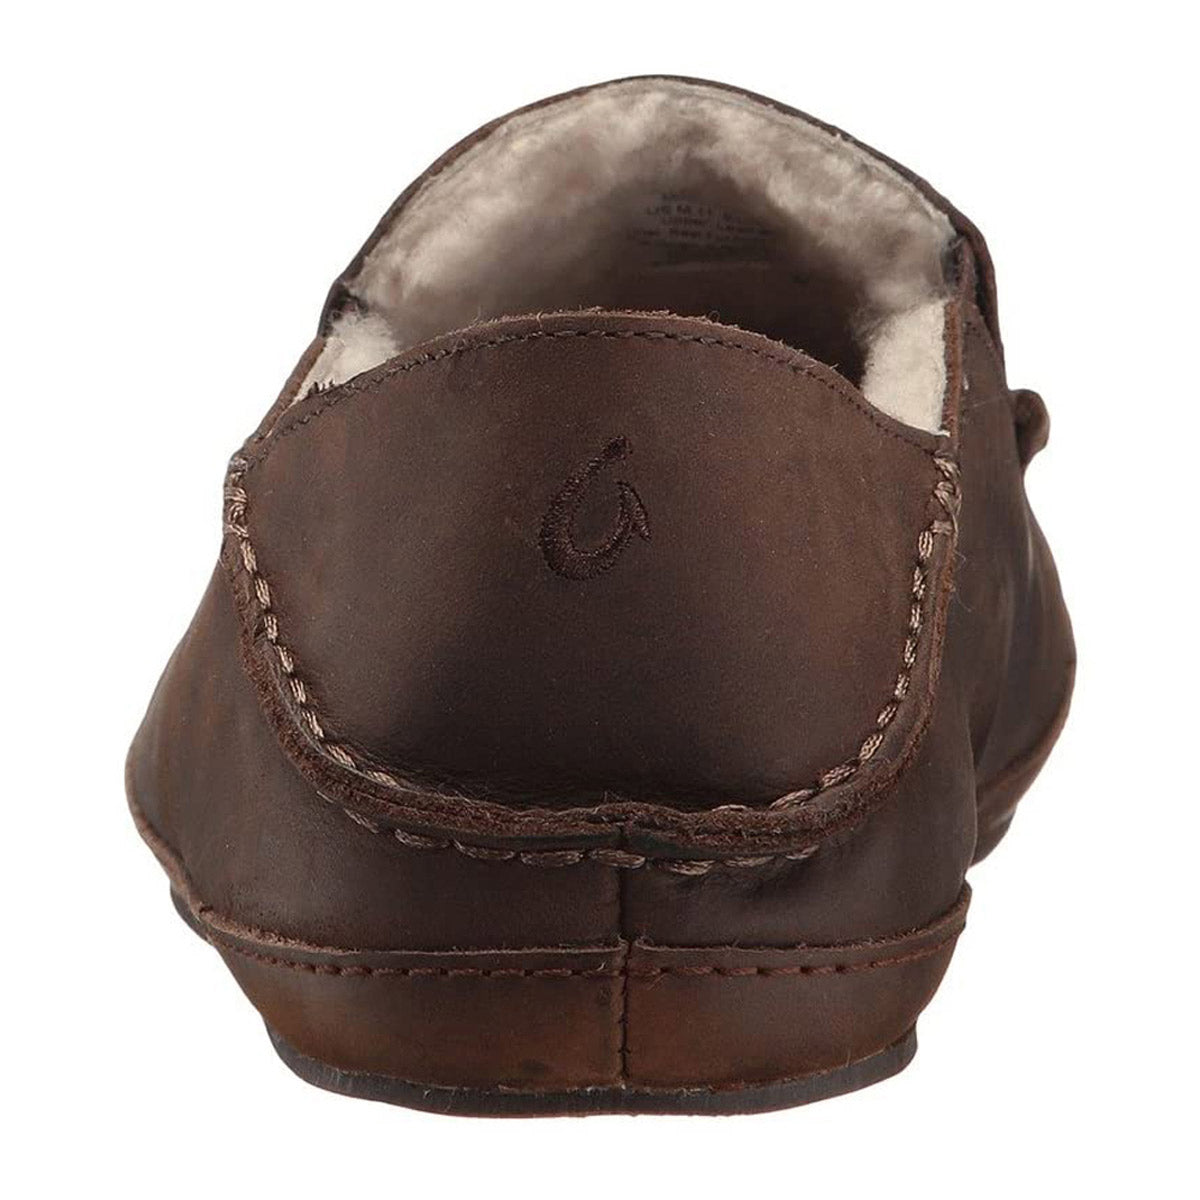 Brown nubuck leather shoe with stitched detailing and logo on the heel, OLUKAI MOLOA SLIPPER DARK WOOD - MENS by Olukai.